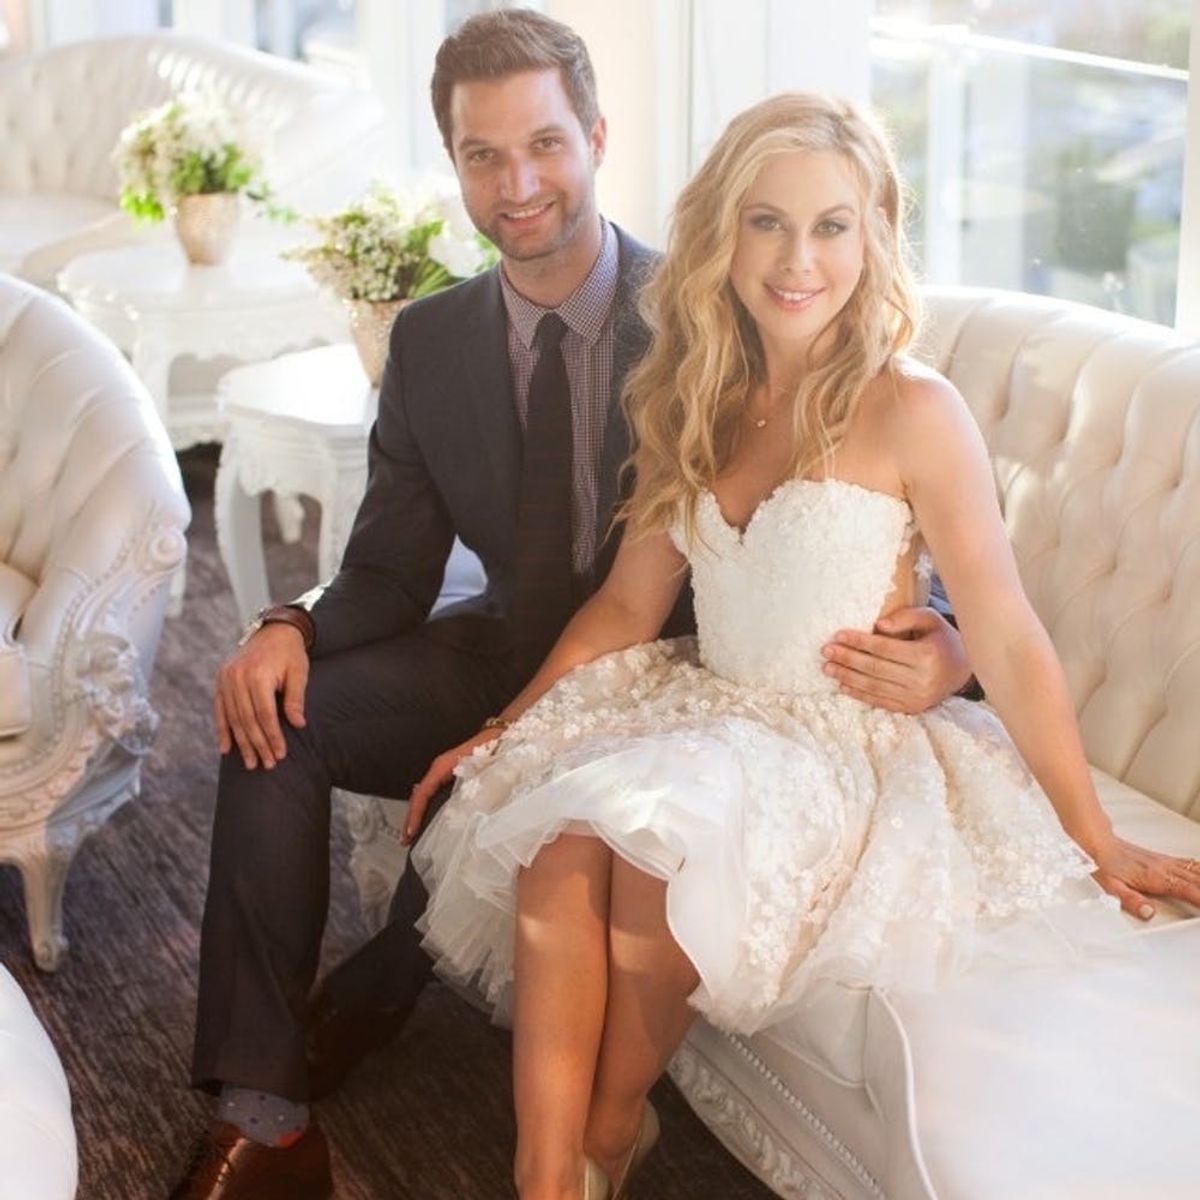 Here Is Why Tara Lipinski Banned This One Popular Color at Her Engagement Party